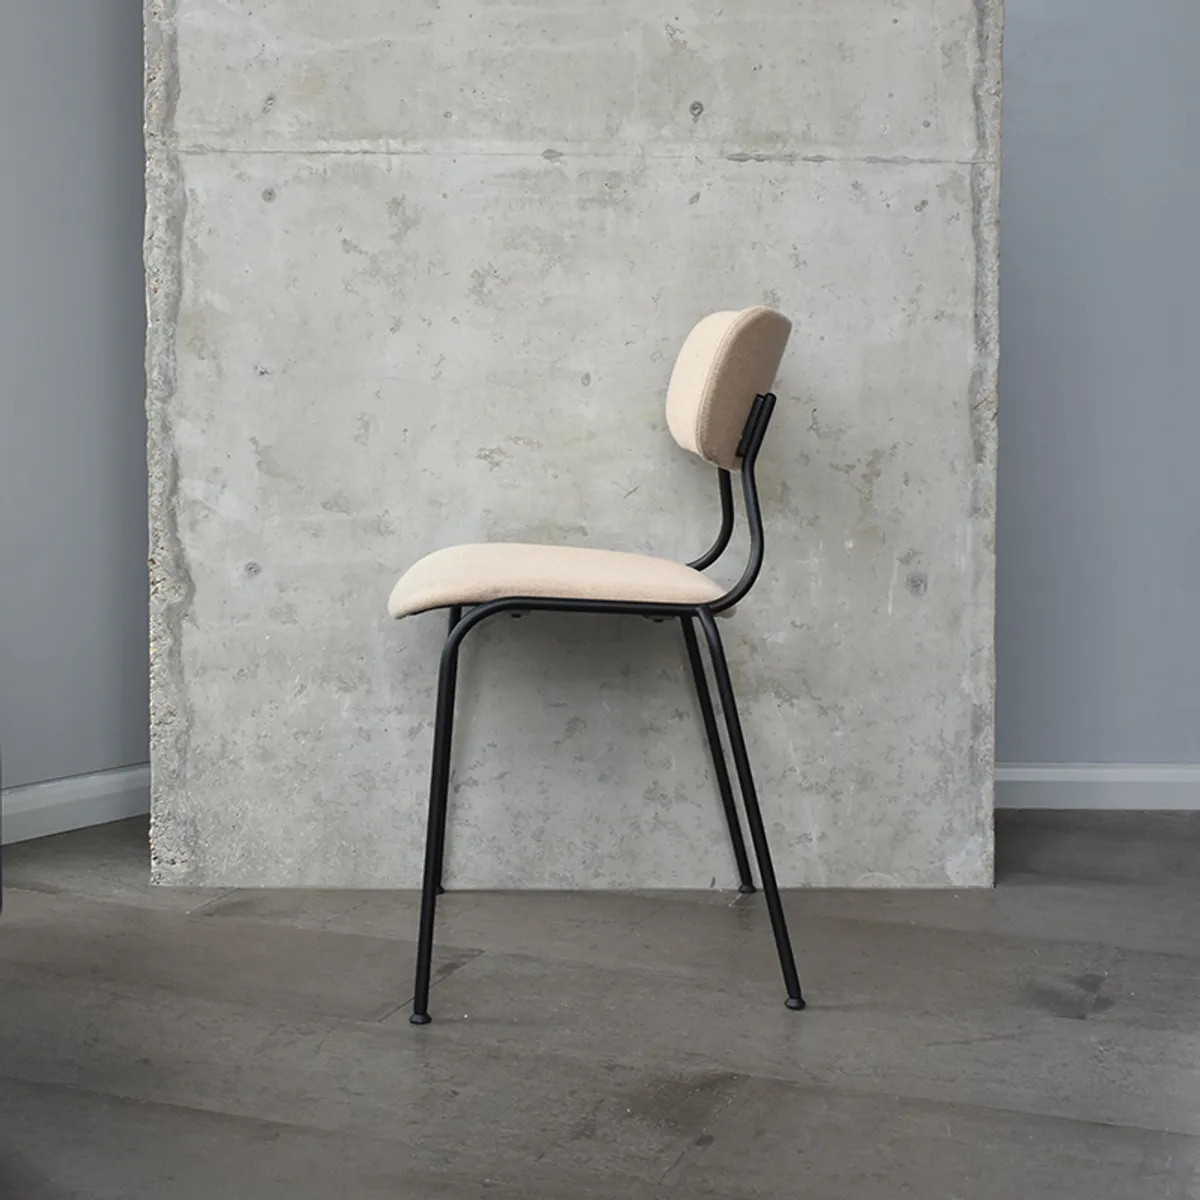 Kiyumi Soft Side Chair New Furniture From Milan 2019 By Inside Out Contracts 010